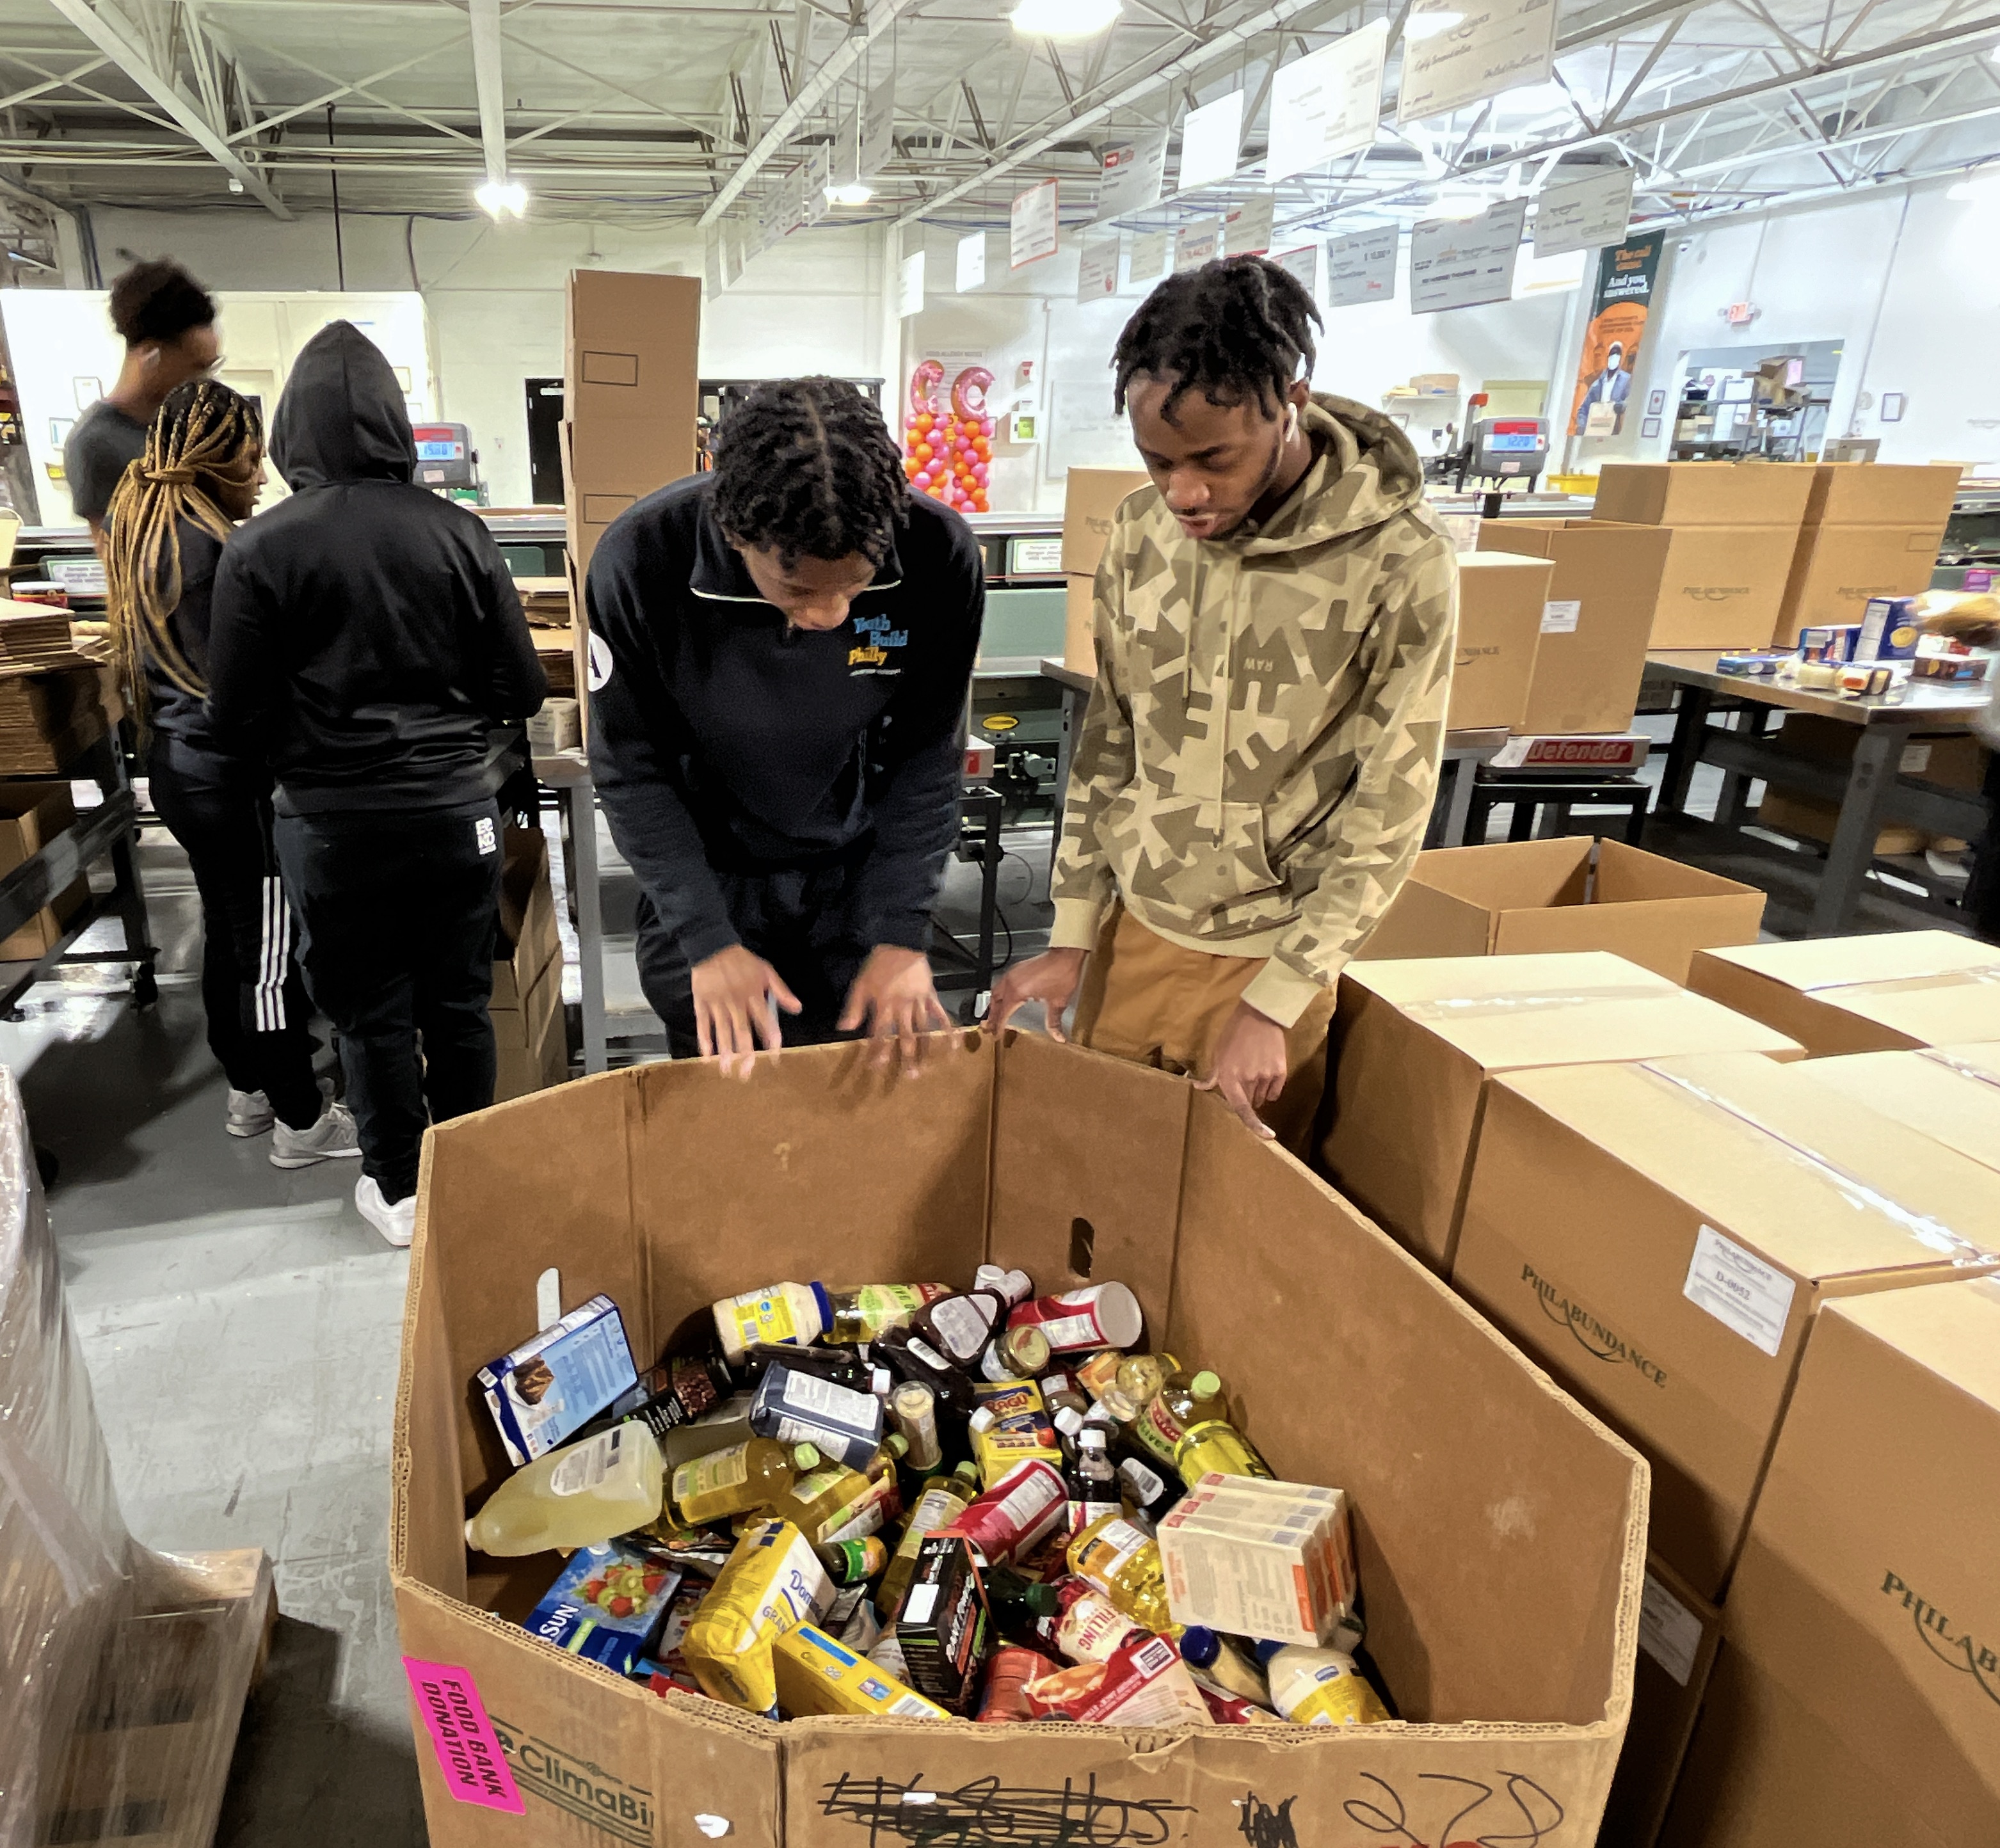 Valentine’s Day Edition: YouthBuild Philly teams up with Philabundance to conduct service and prepare food boxes for families in need